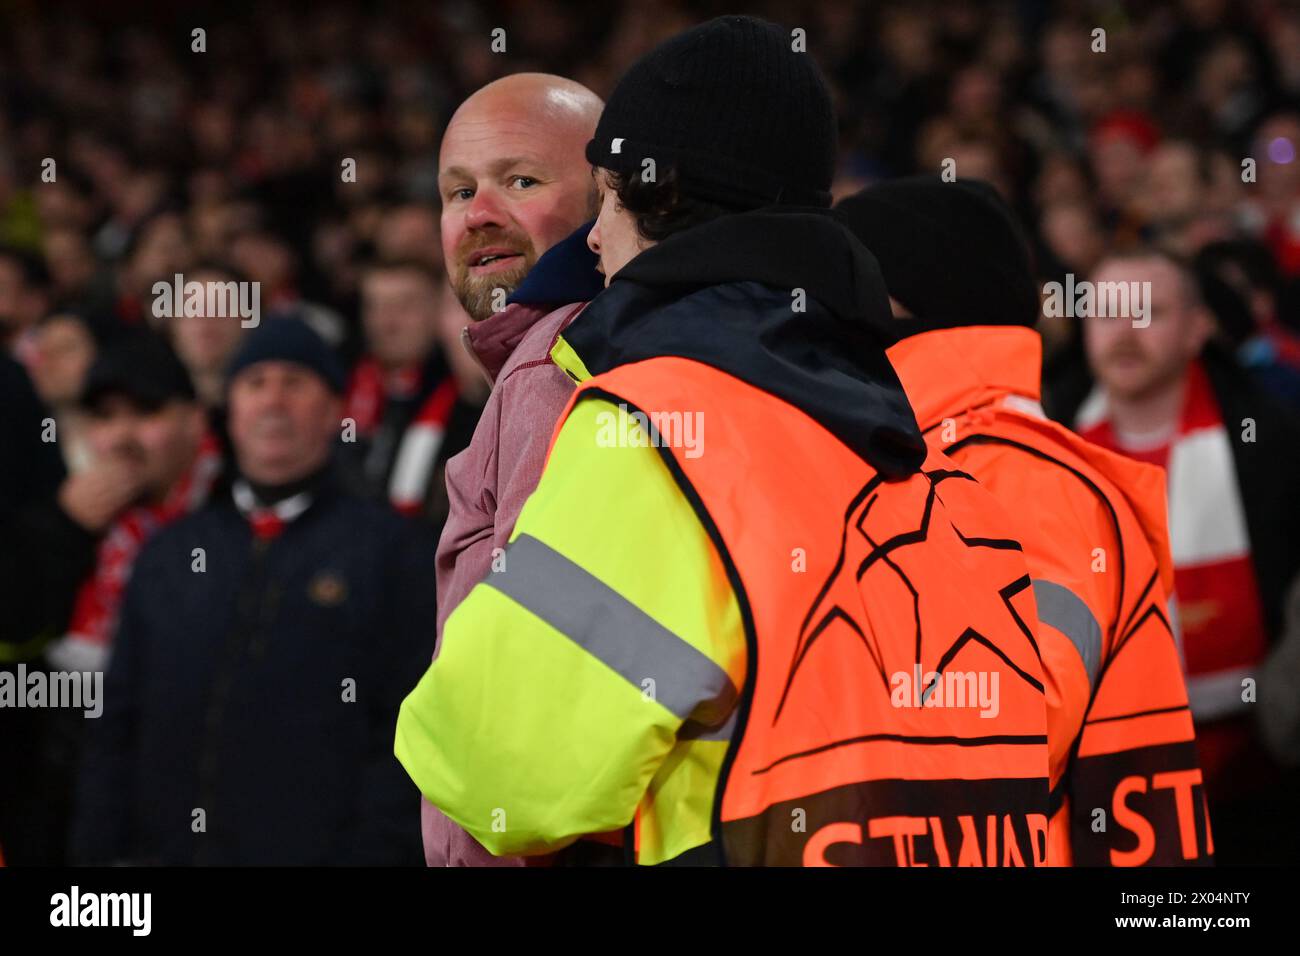 Bayern Munich fans is removed from the ground by security during the UEFA Champions League Quarter-Final (1st leg) football match between Arsenal FC and Bayern Munich at the Emirates Stadium in London, England. (Will Palmer/SPP/ATP Images) Credit: SPP Sport Press Photo. /Alamy Live News Stock Photo